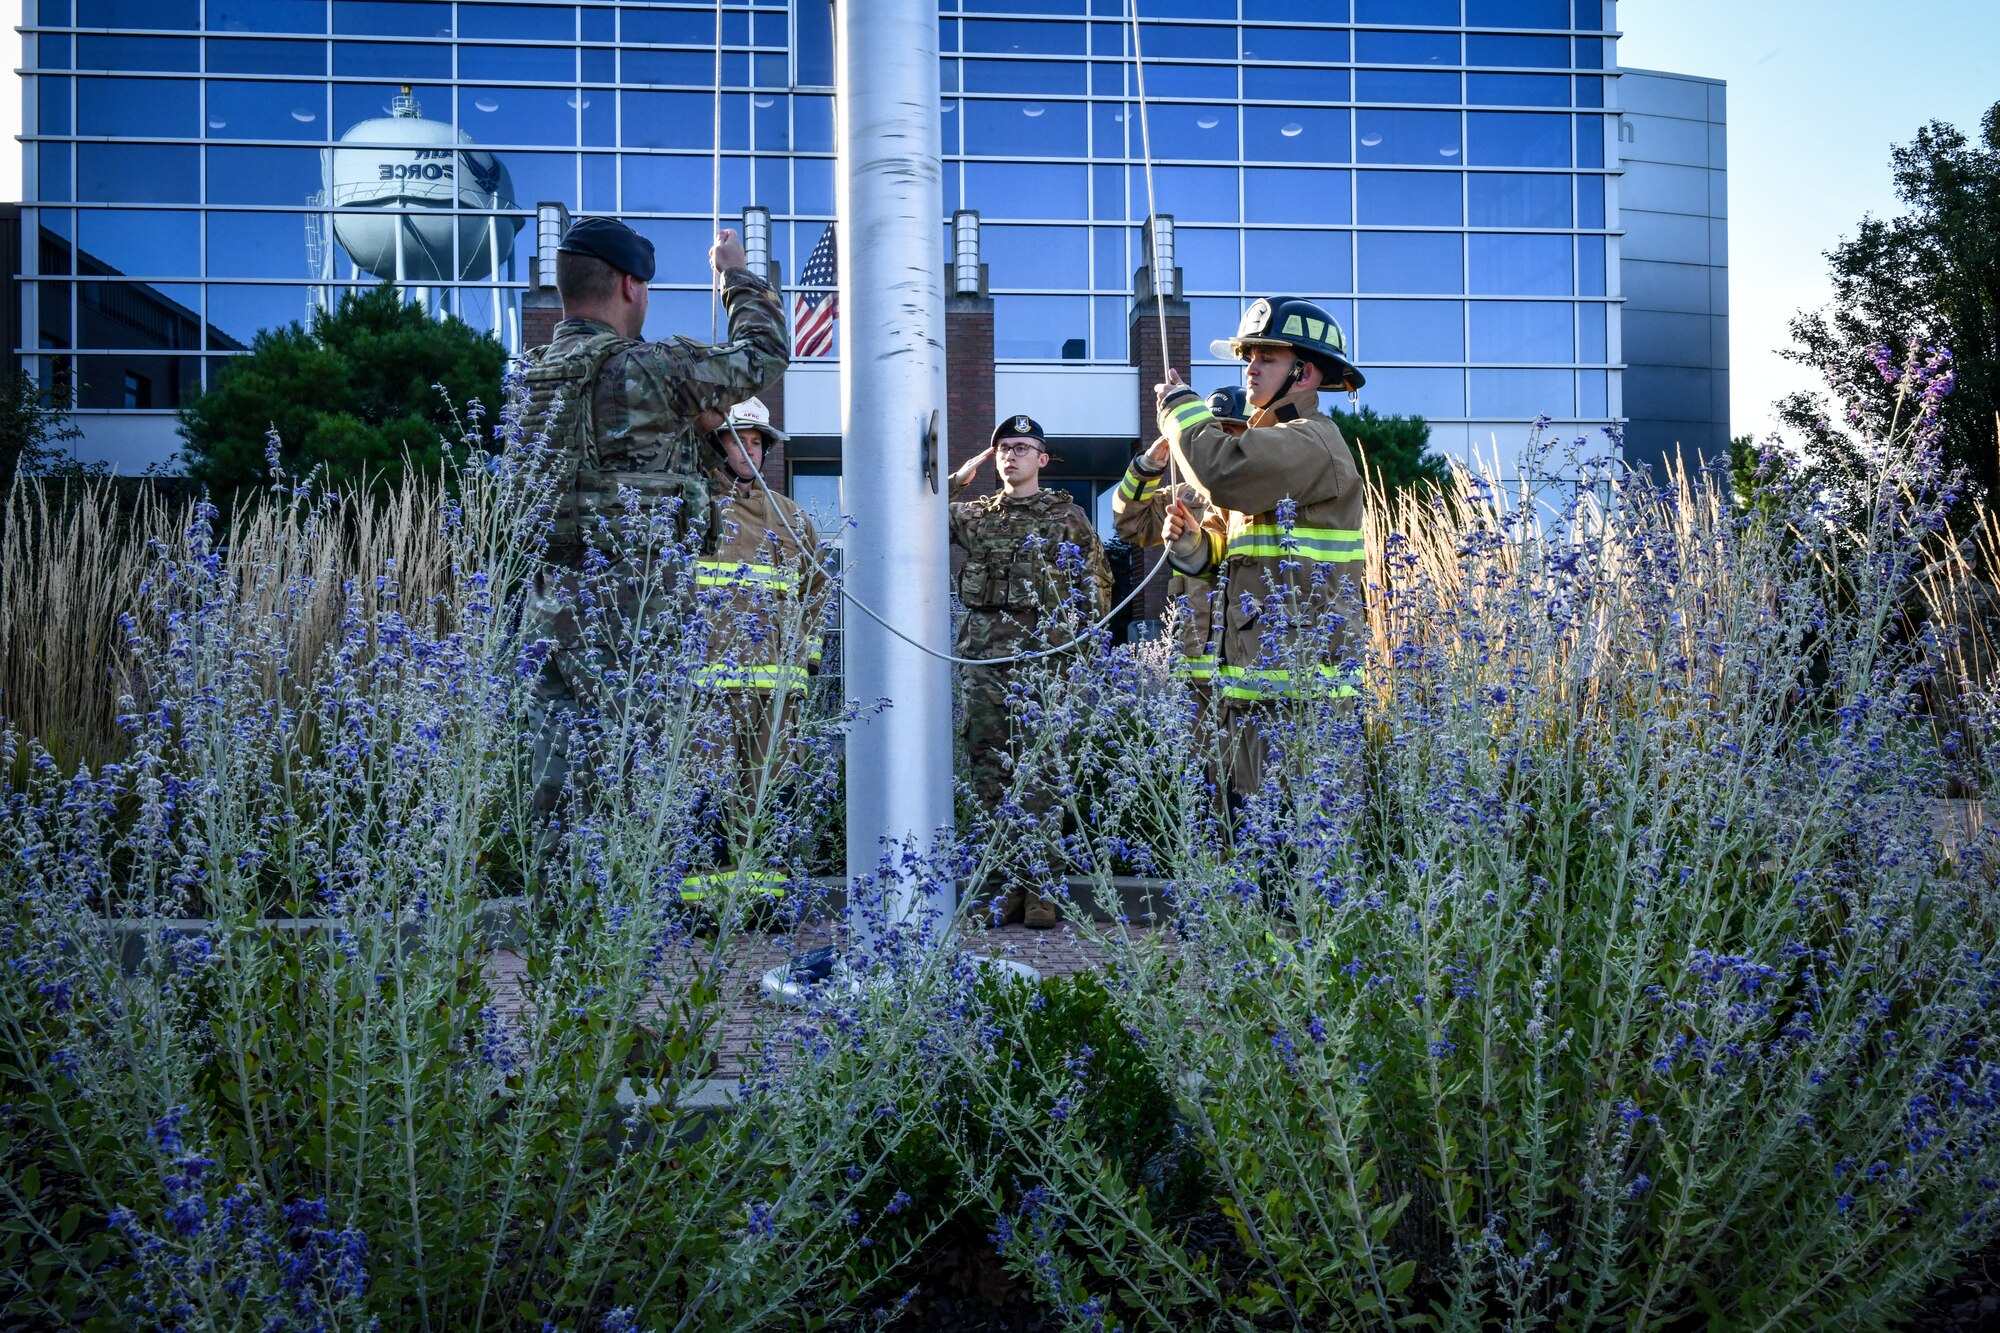 Youngstown Air Reserve Station held a ceremony to commemorate the 20th anniversary of 9/11.